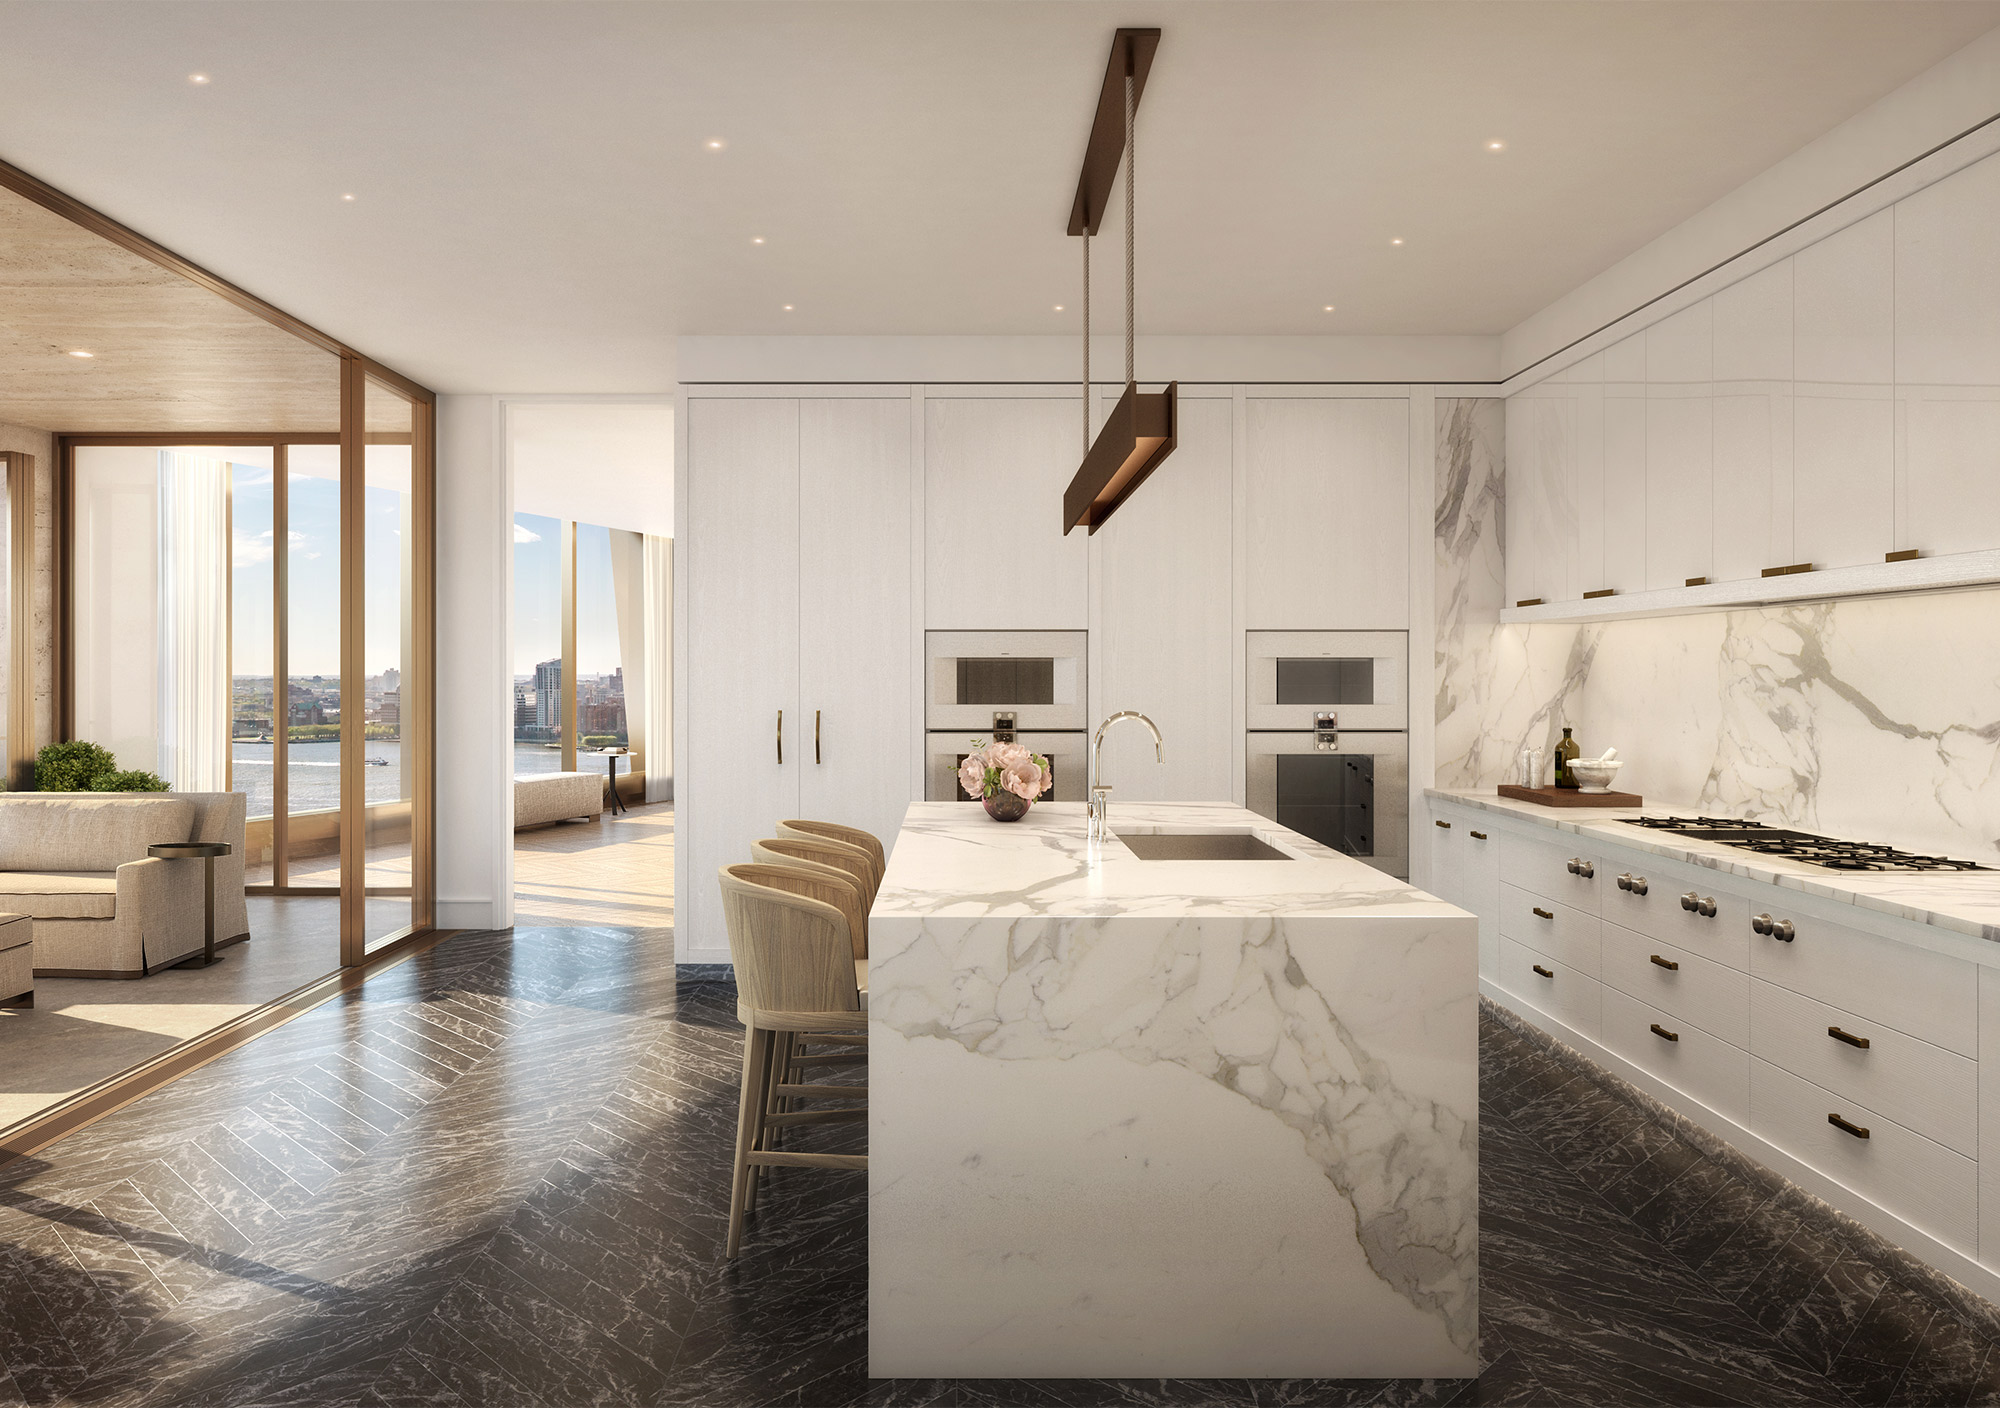 Marble island in kitchen with white cabinets